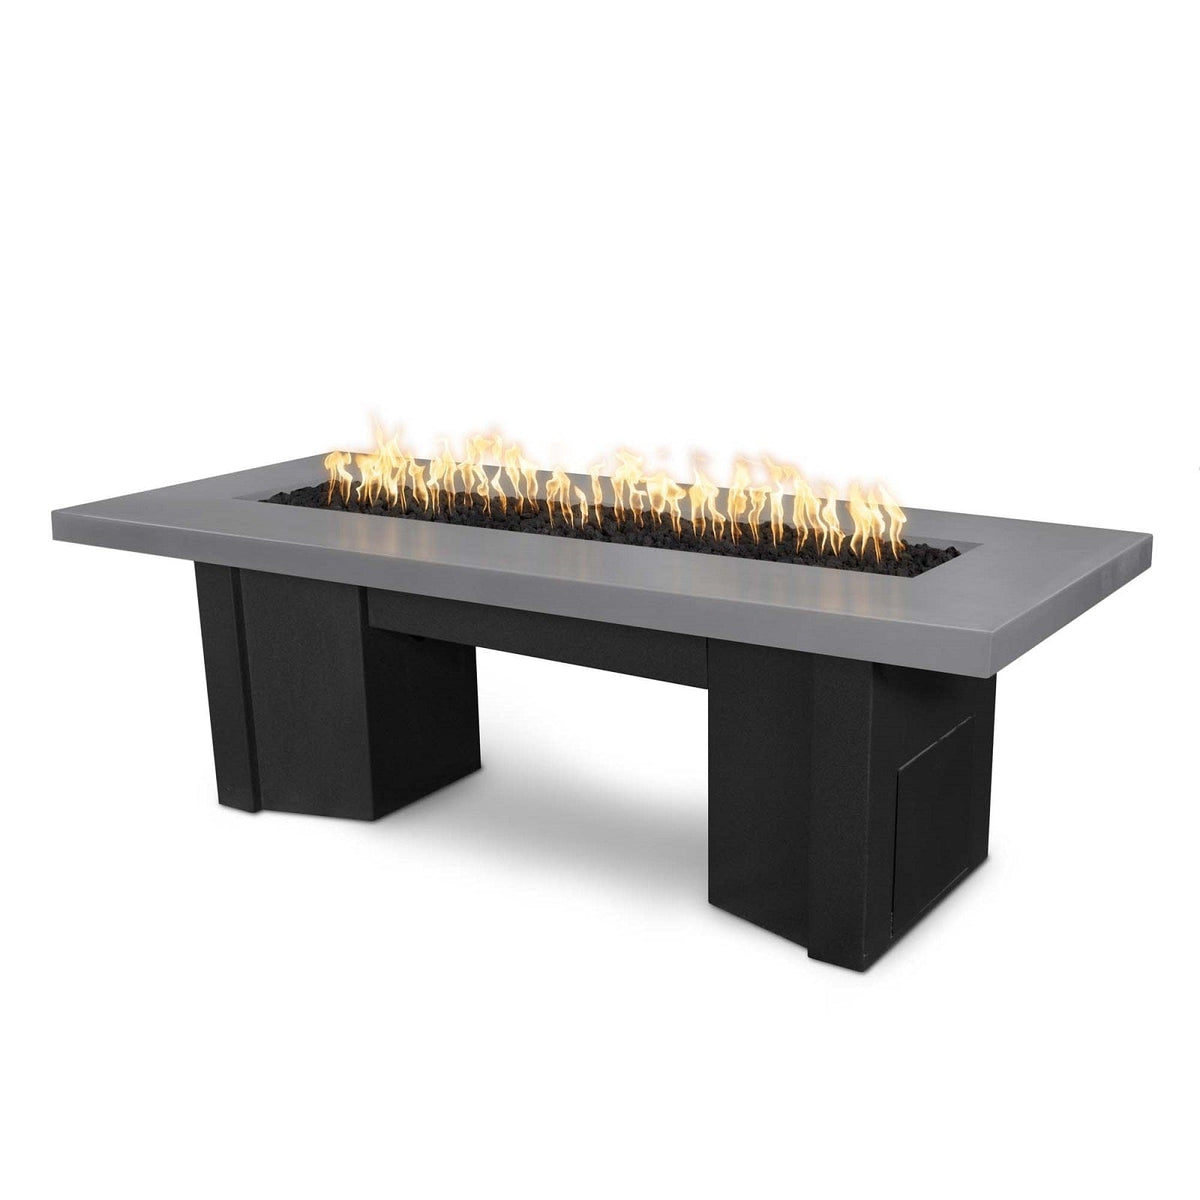 The Outdoor Plus Fire Features Natural Gray (-NGY) / Black Powder Coated Steel (-BLK) The Outdoor Plus 78&quot; Alameda Fire Table Smooth Concrete in Liquid Propane - Match Lit with Flame Sense System / OPT-ALMGFRC78FSML-LP